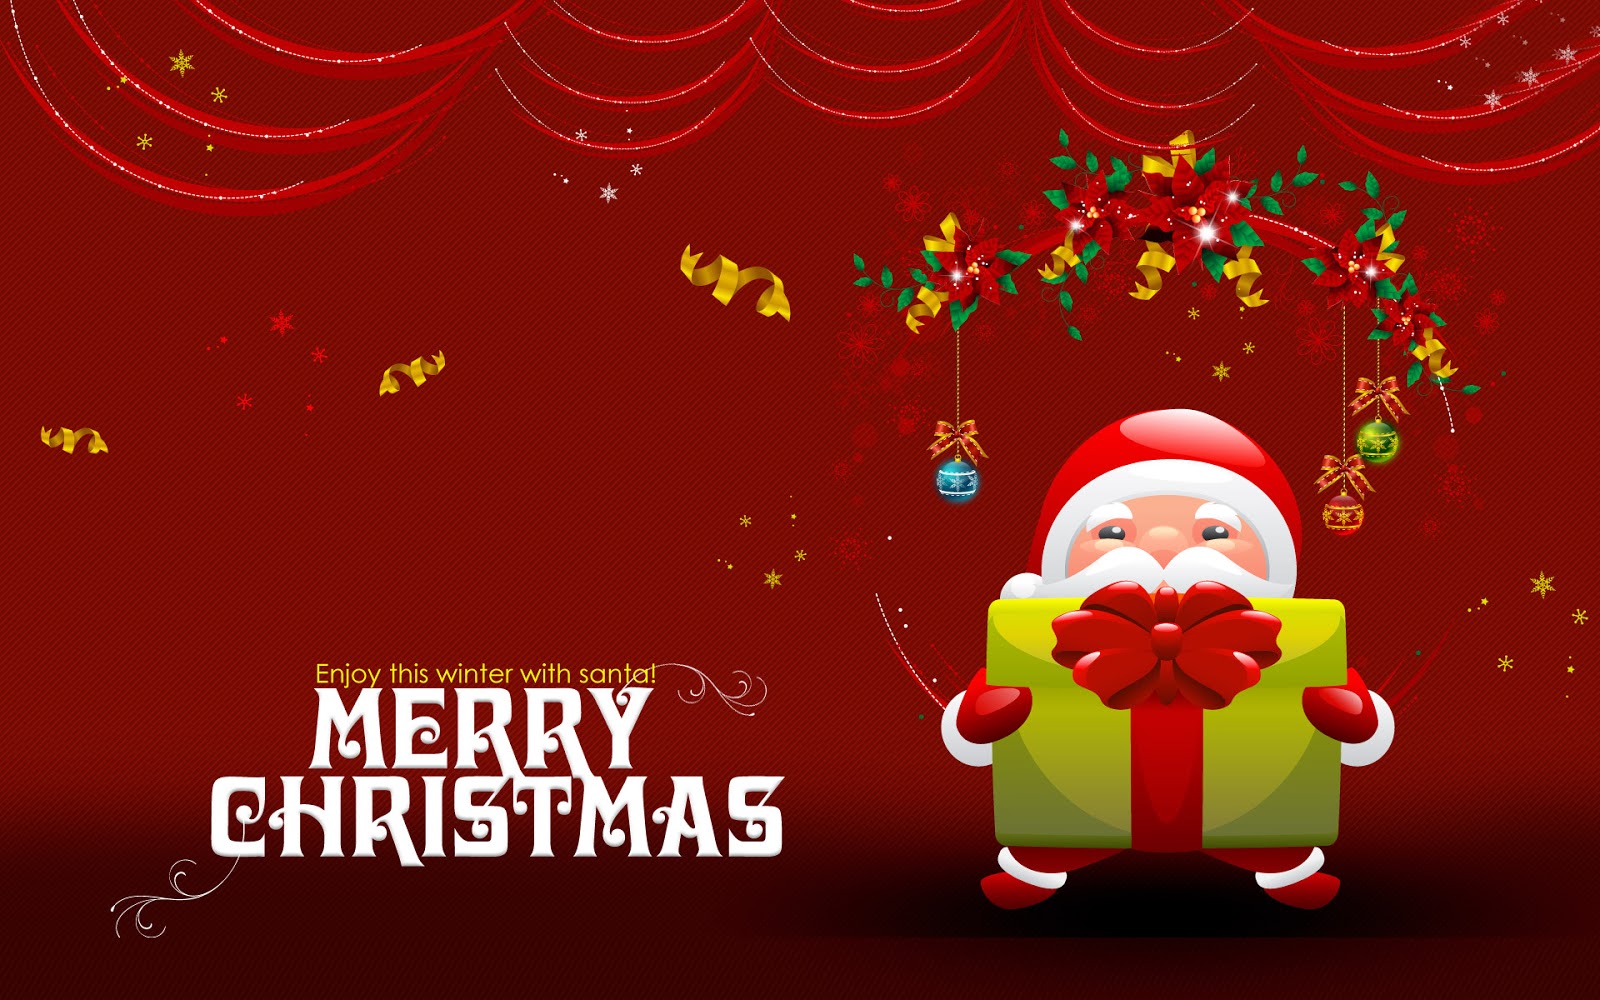 Merry Christmas 2014 Greetings E Cards Wallpapers Cards Merry